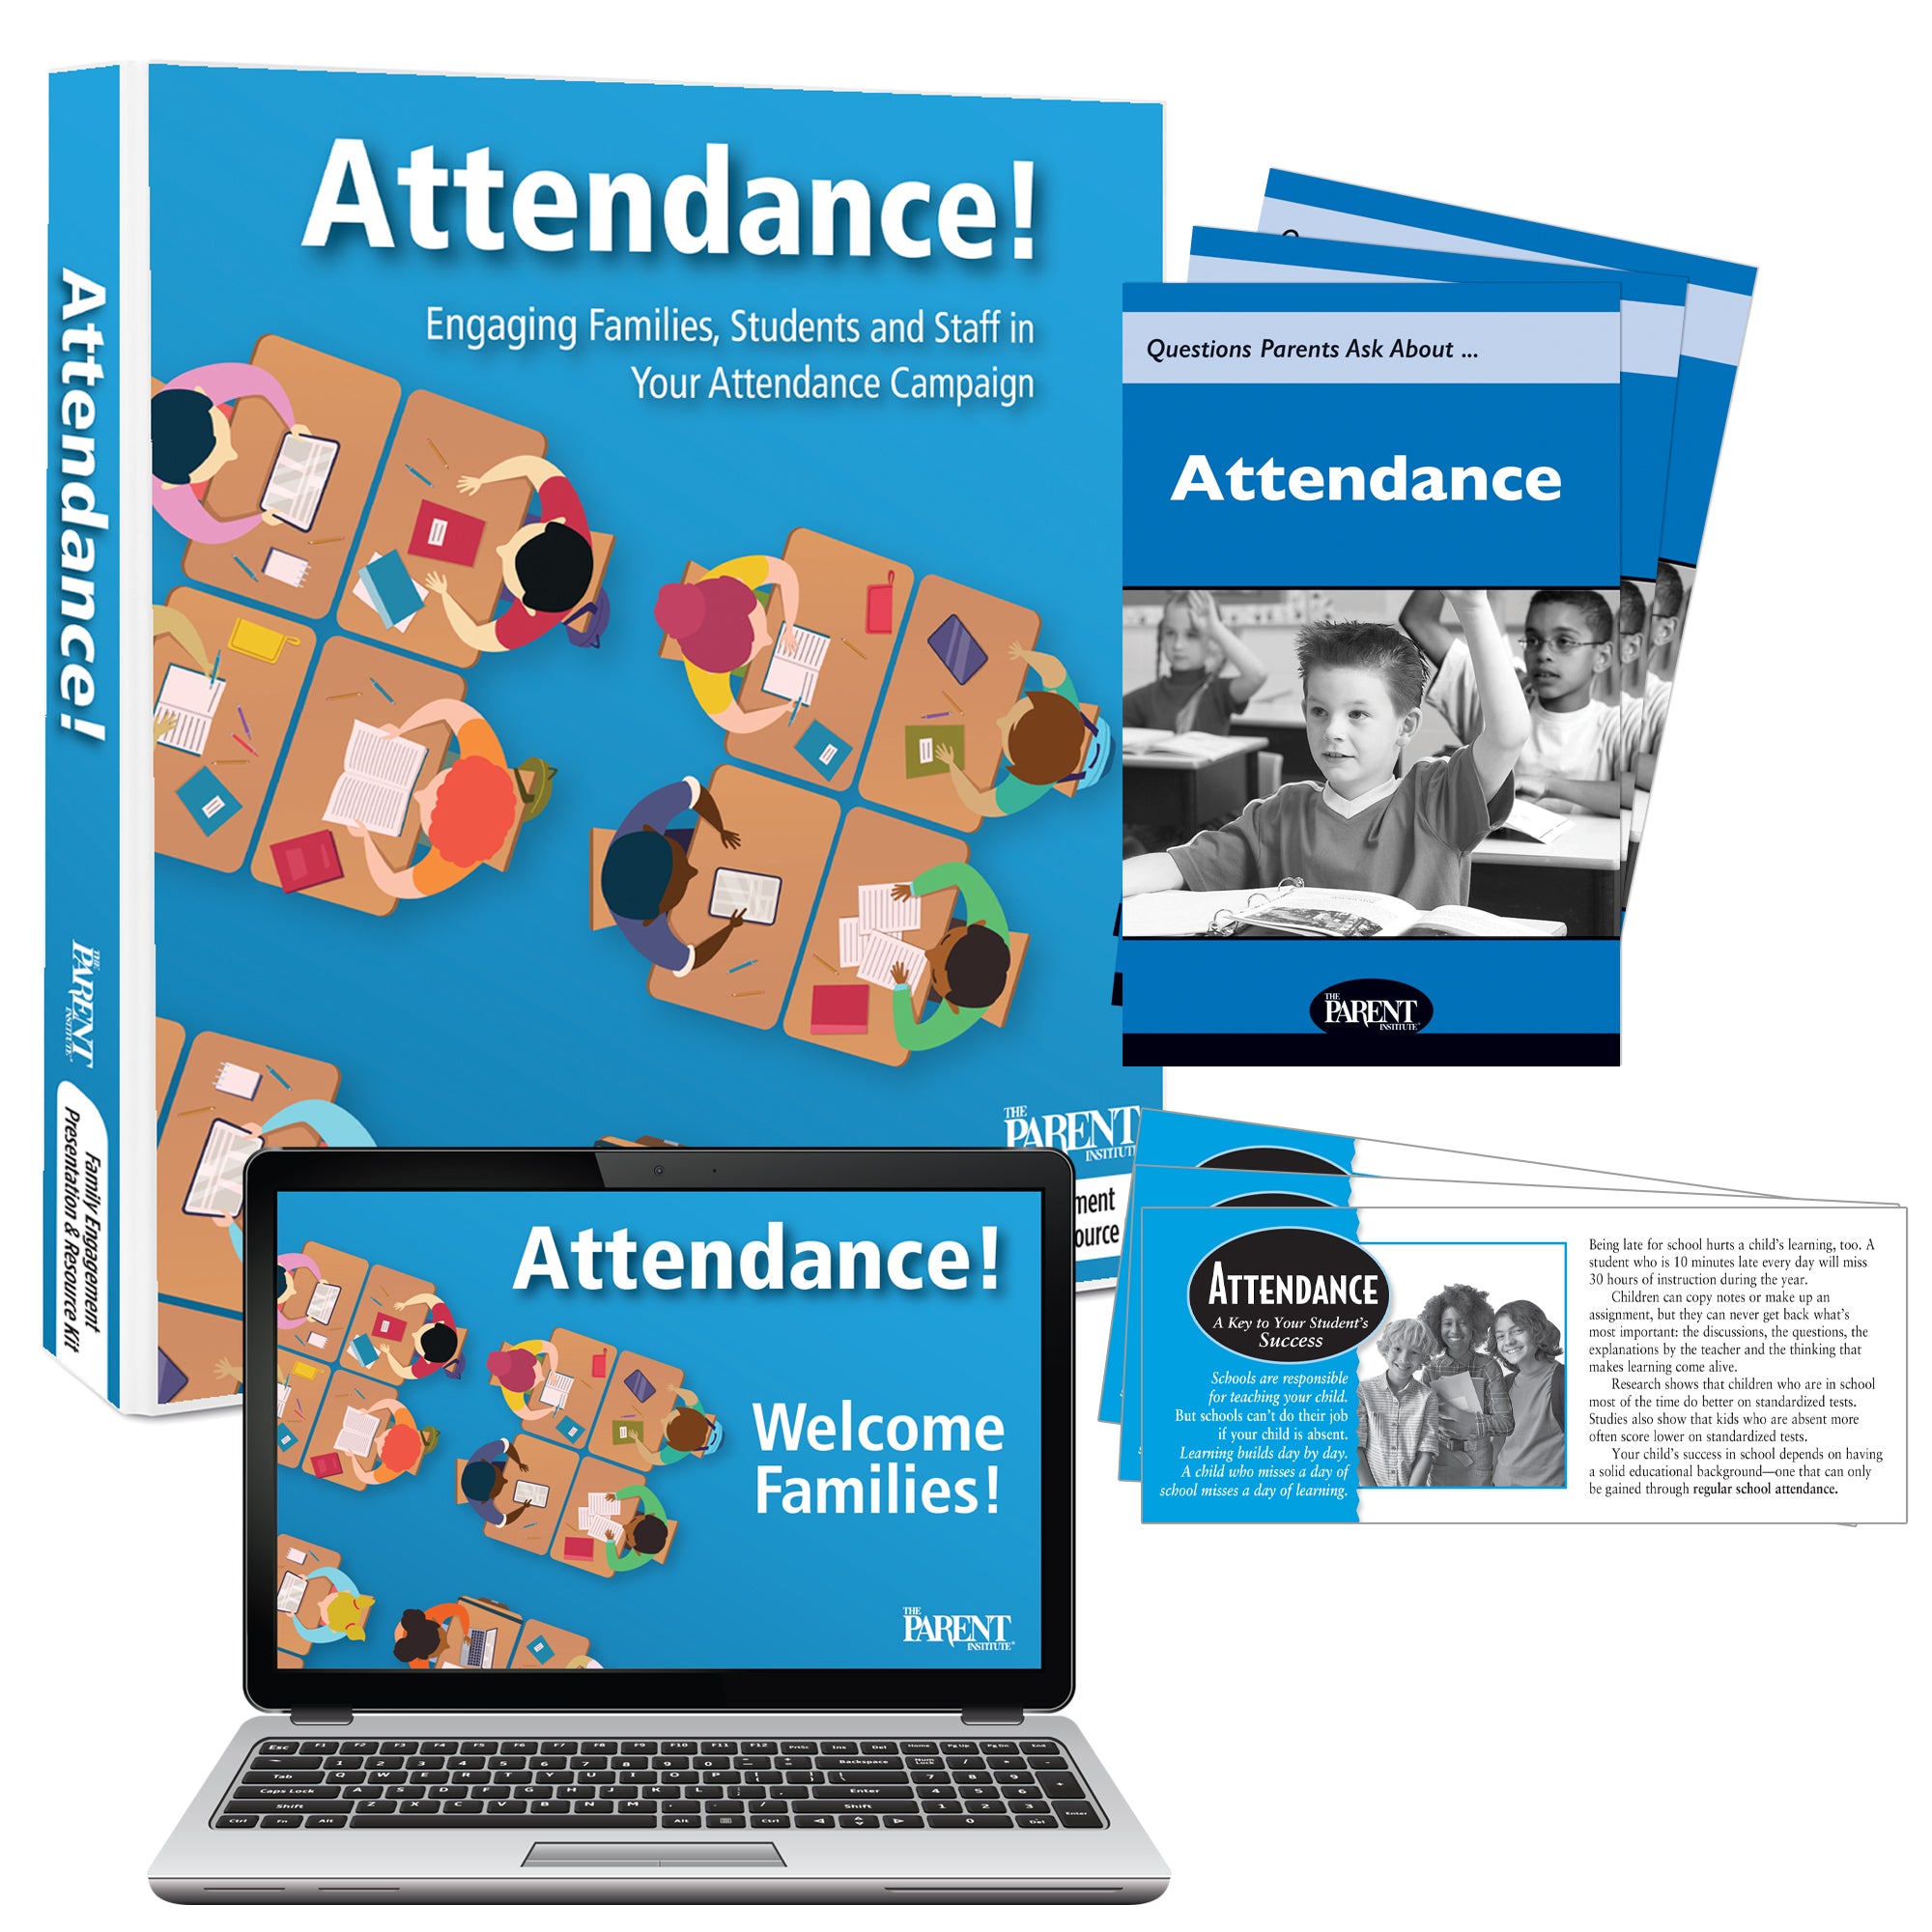 Attendance: Engaging Families, Students and Staff in Your Attendance Campaign Resource Kit